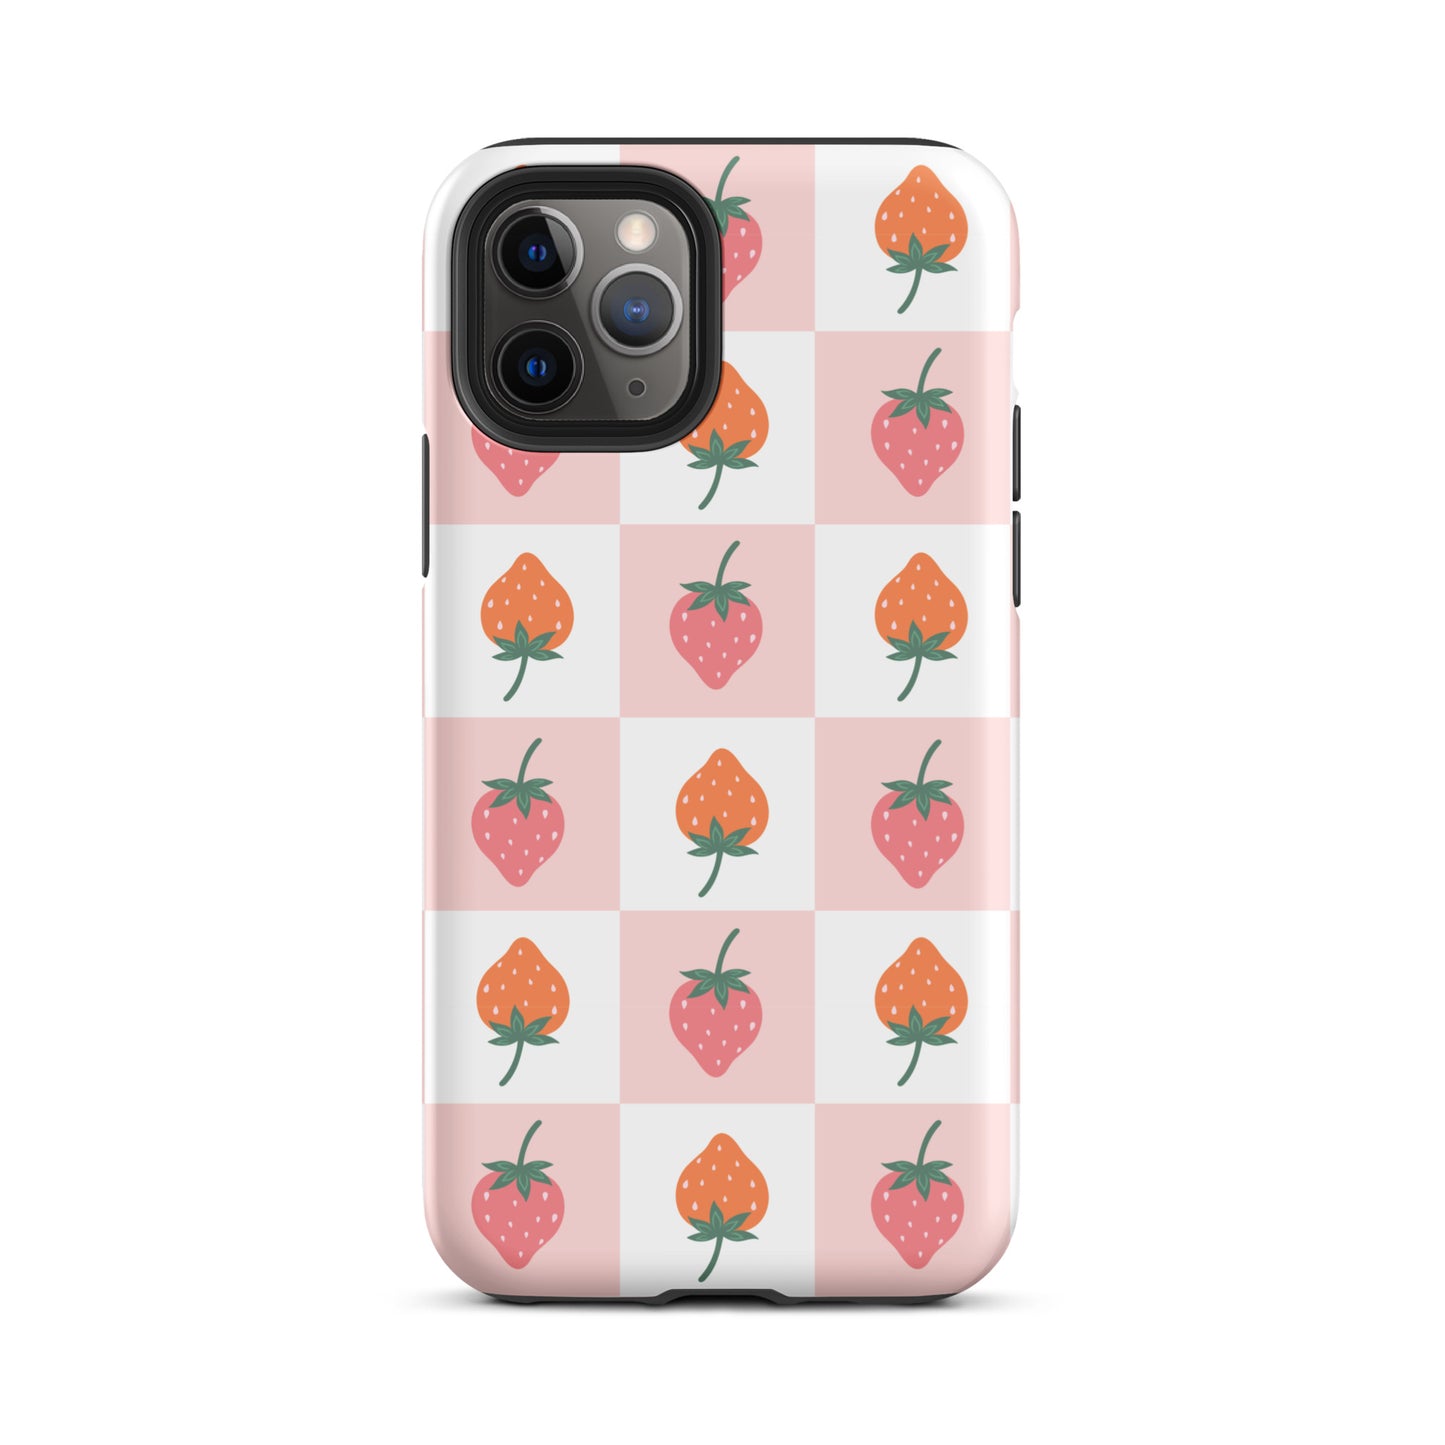 Strawberry Checkered iPhone Case iPhone 11 Pro Matte